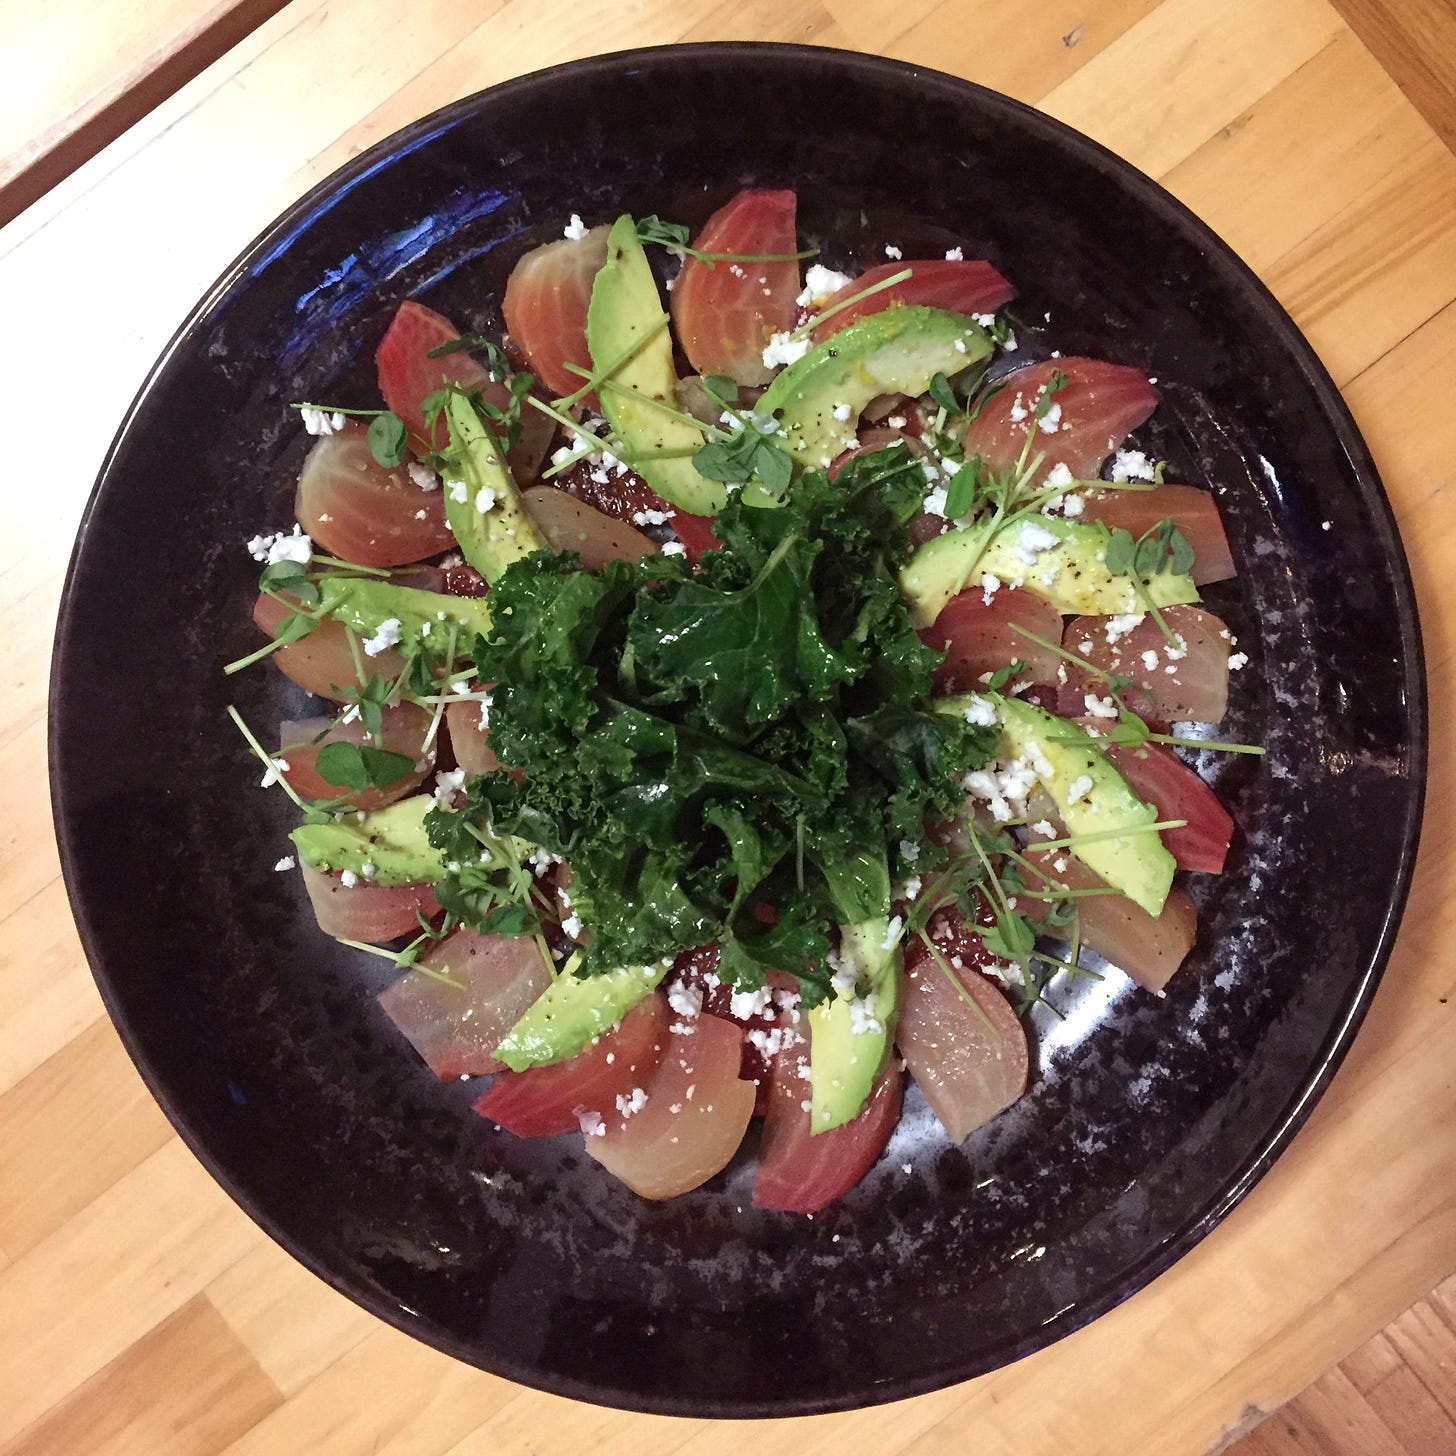 a shallow black bowl filled with slices of pink beets arranged with avocado in a circle. Slices of blood orange are just visible below them, and on top is a small pile of kale leaves and a sprinkling of feta and pea shoots.